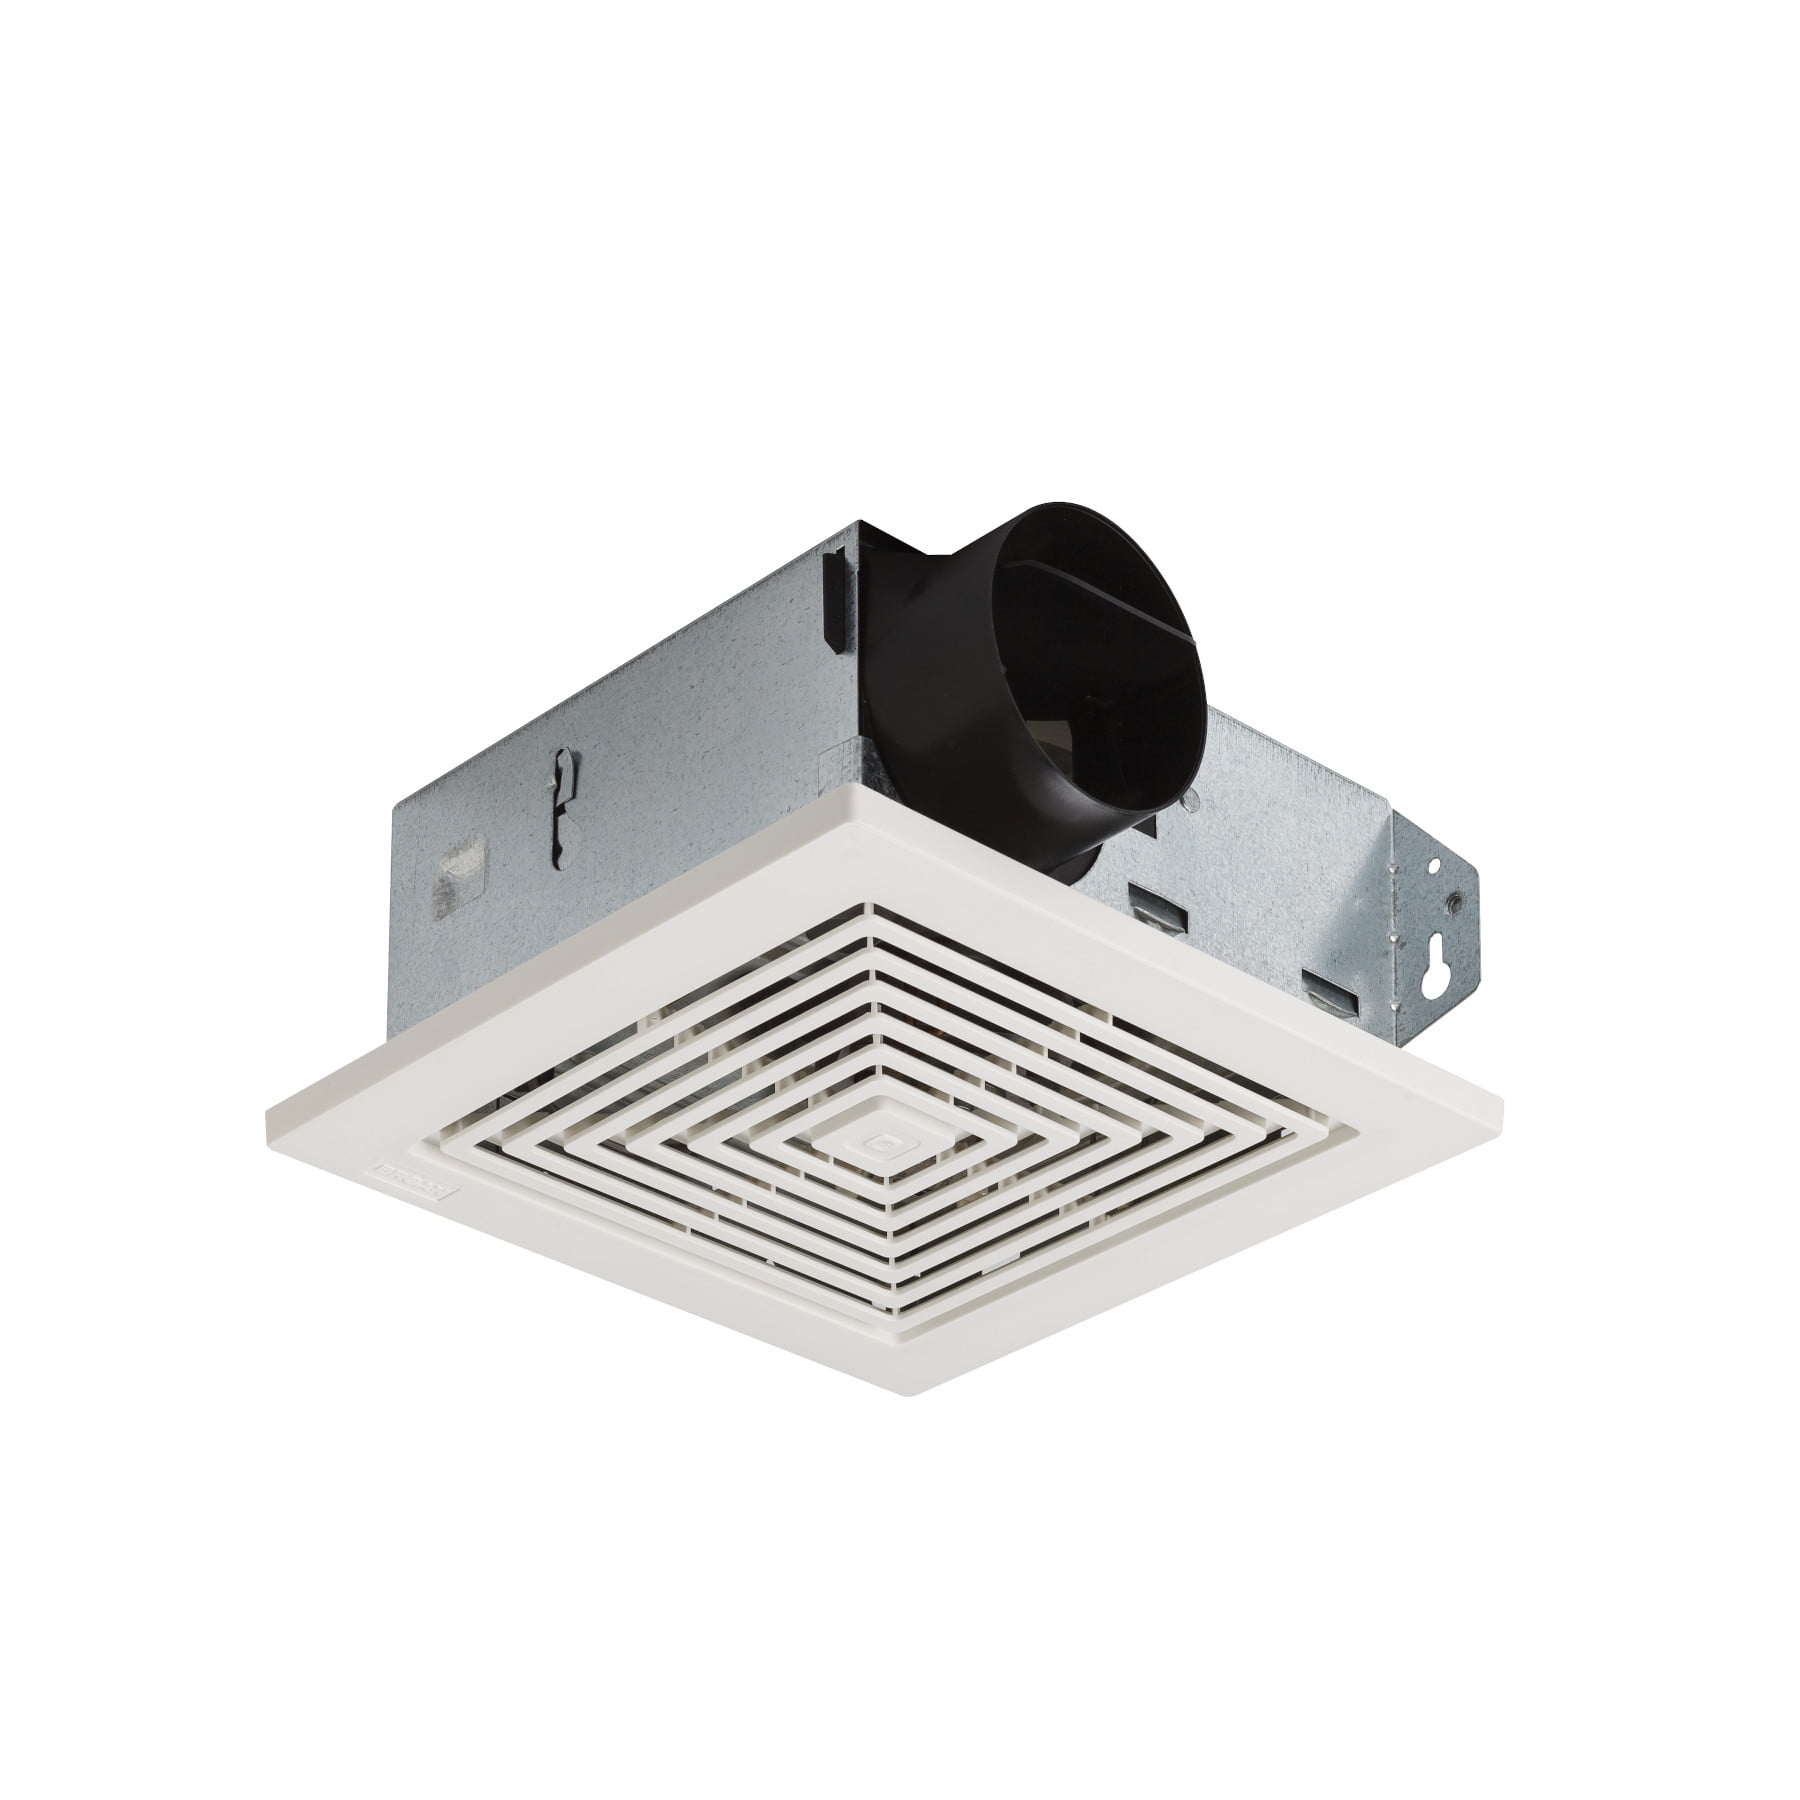 Broan-NuTone 688 Ceiling and Wall Ventilation Fan, 50 CFM 4.0 Sones, White  Plastic Grille